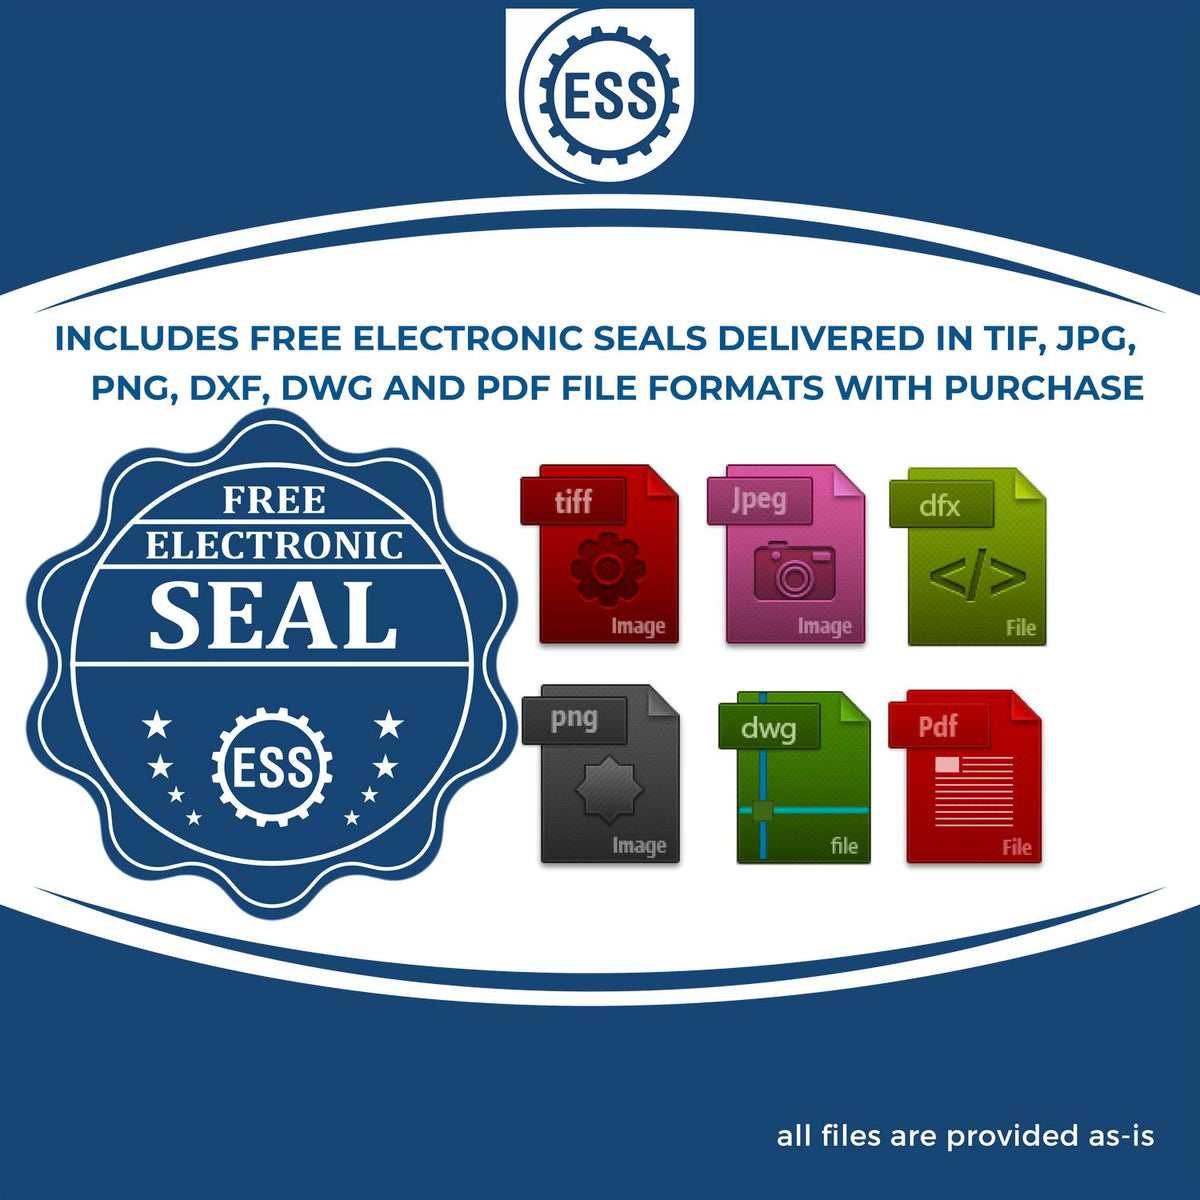 An infographic for the free electronic seal for the Extended Long Reach Texas Architect Seal Embosser illustrating the different file type icons such as DXF, DWG, TIF, JPG and PNG.